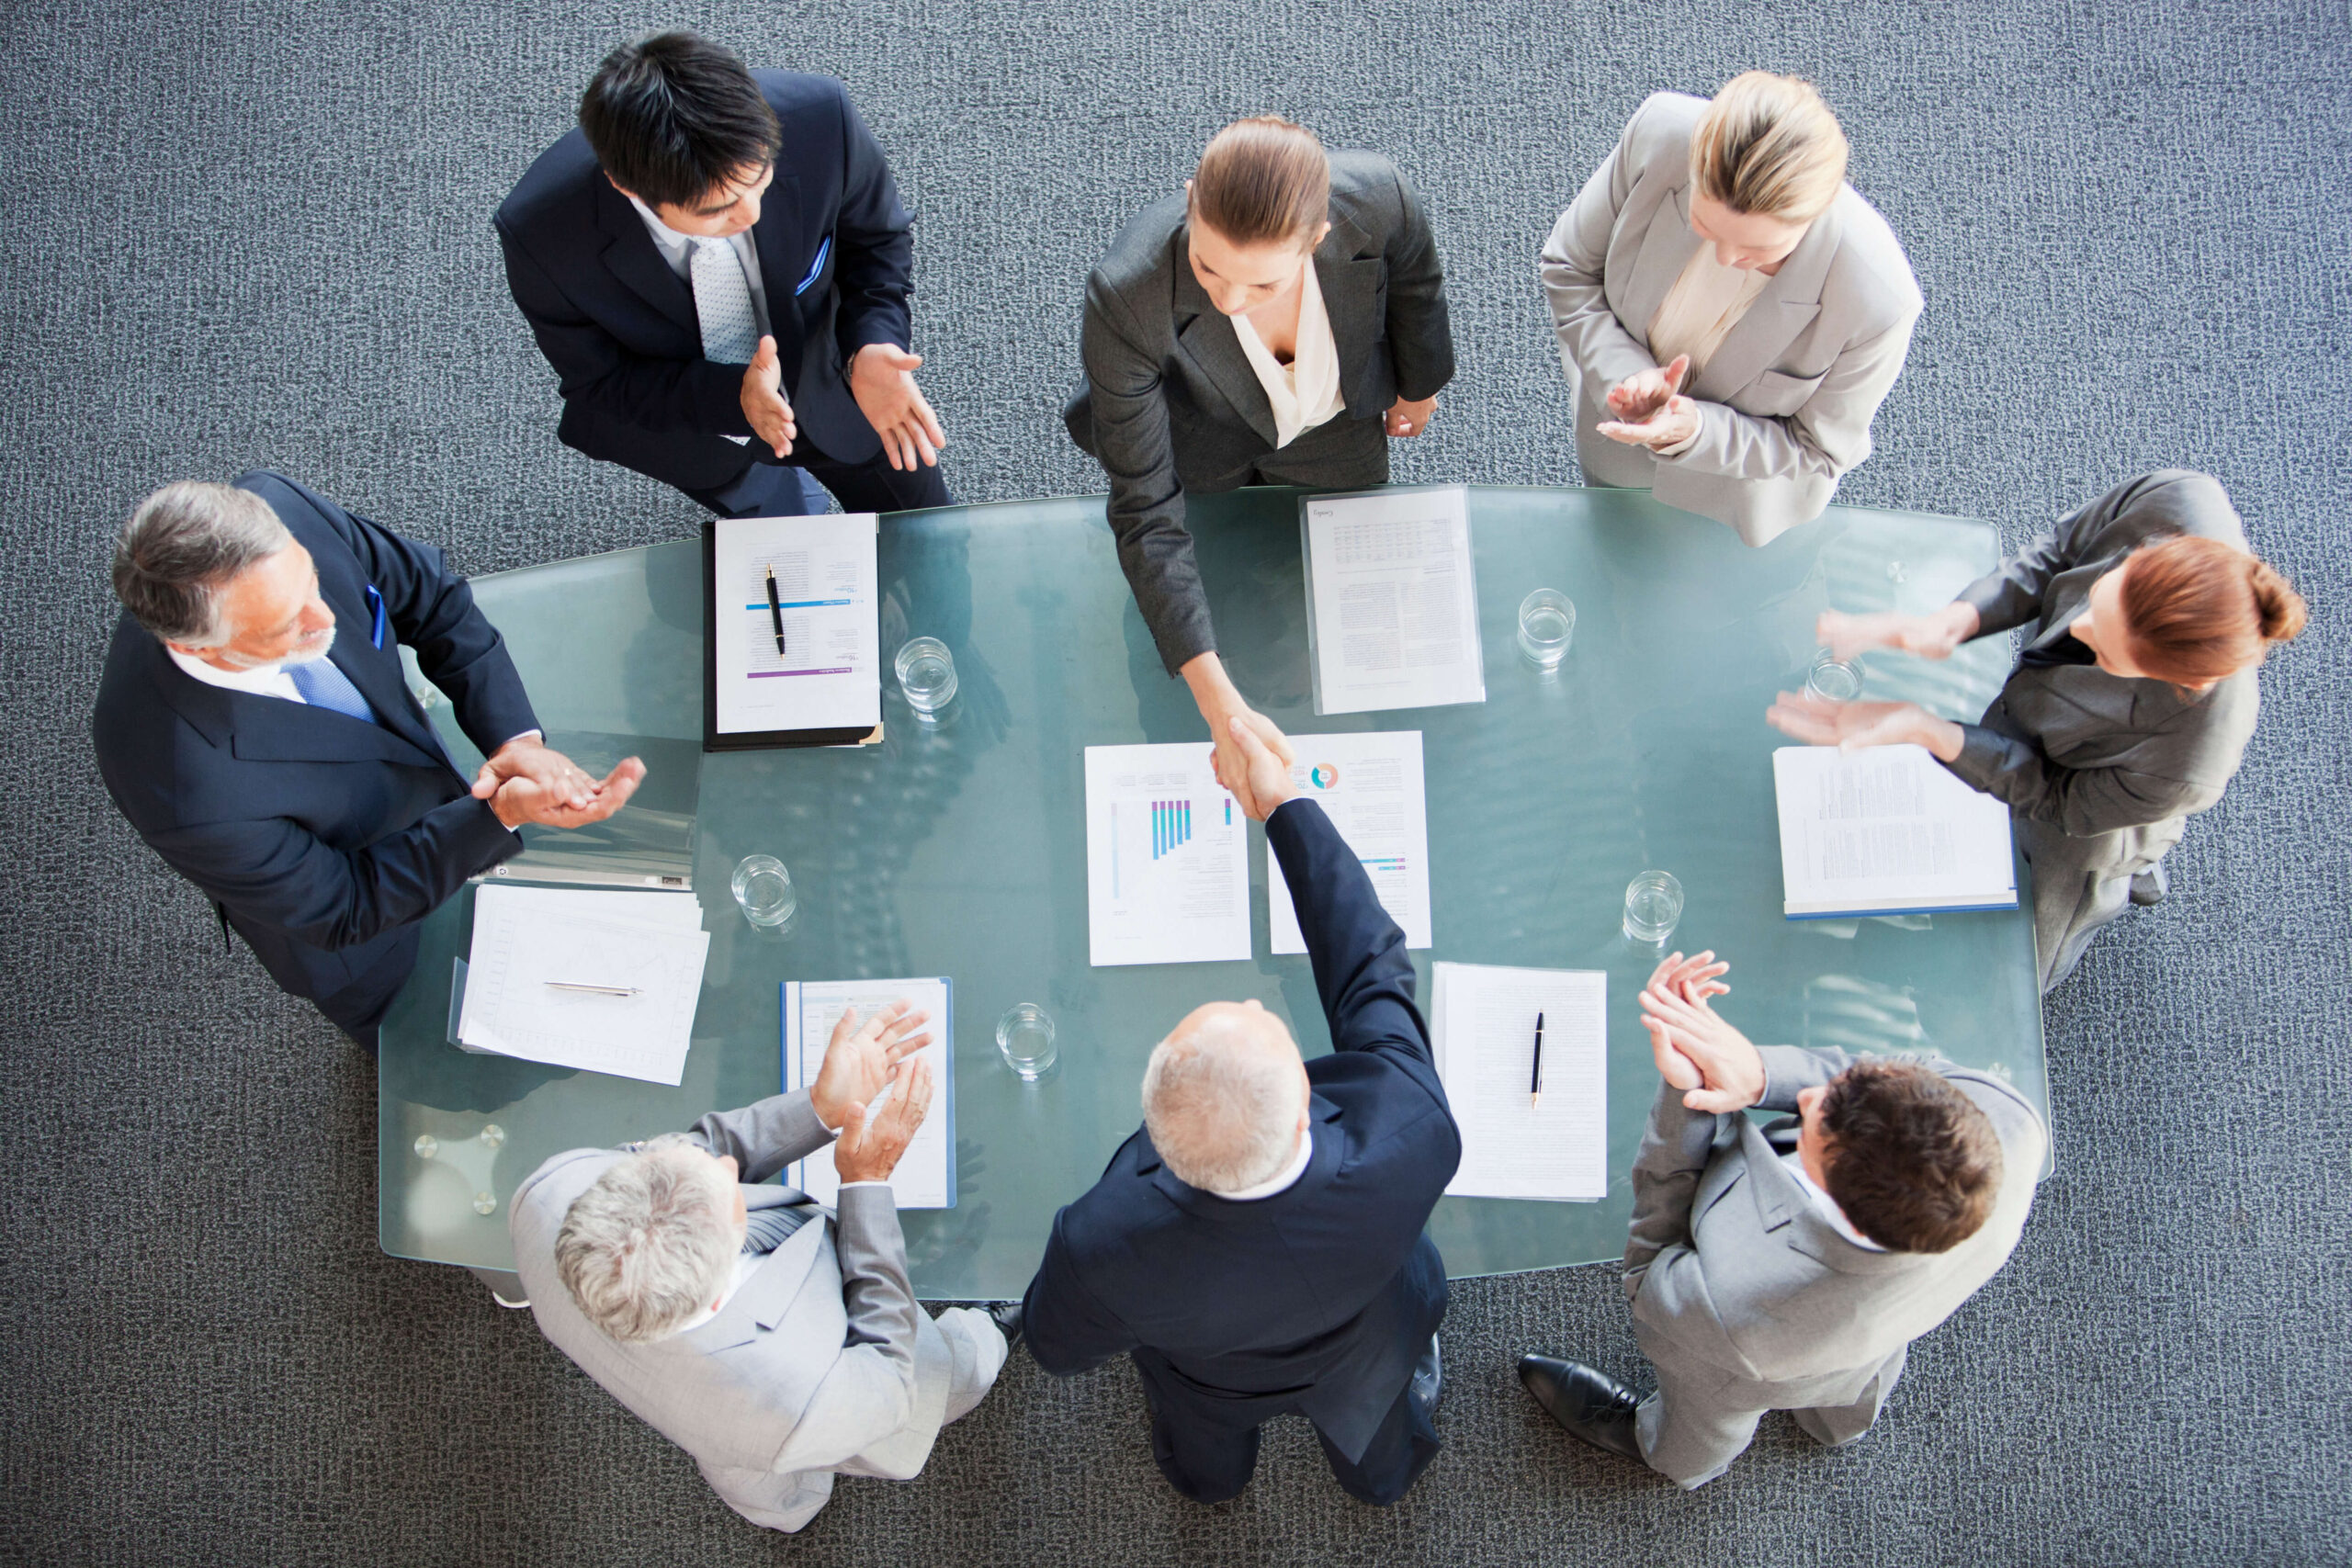 Eight business people standing around a table with documents shaking hands.